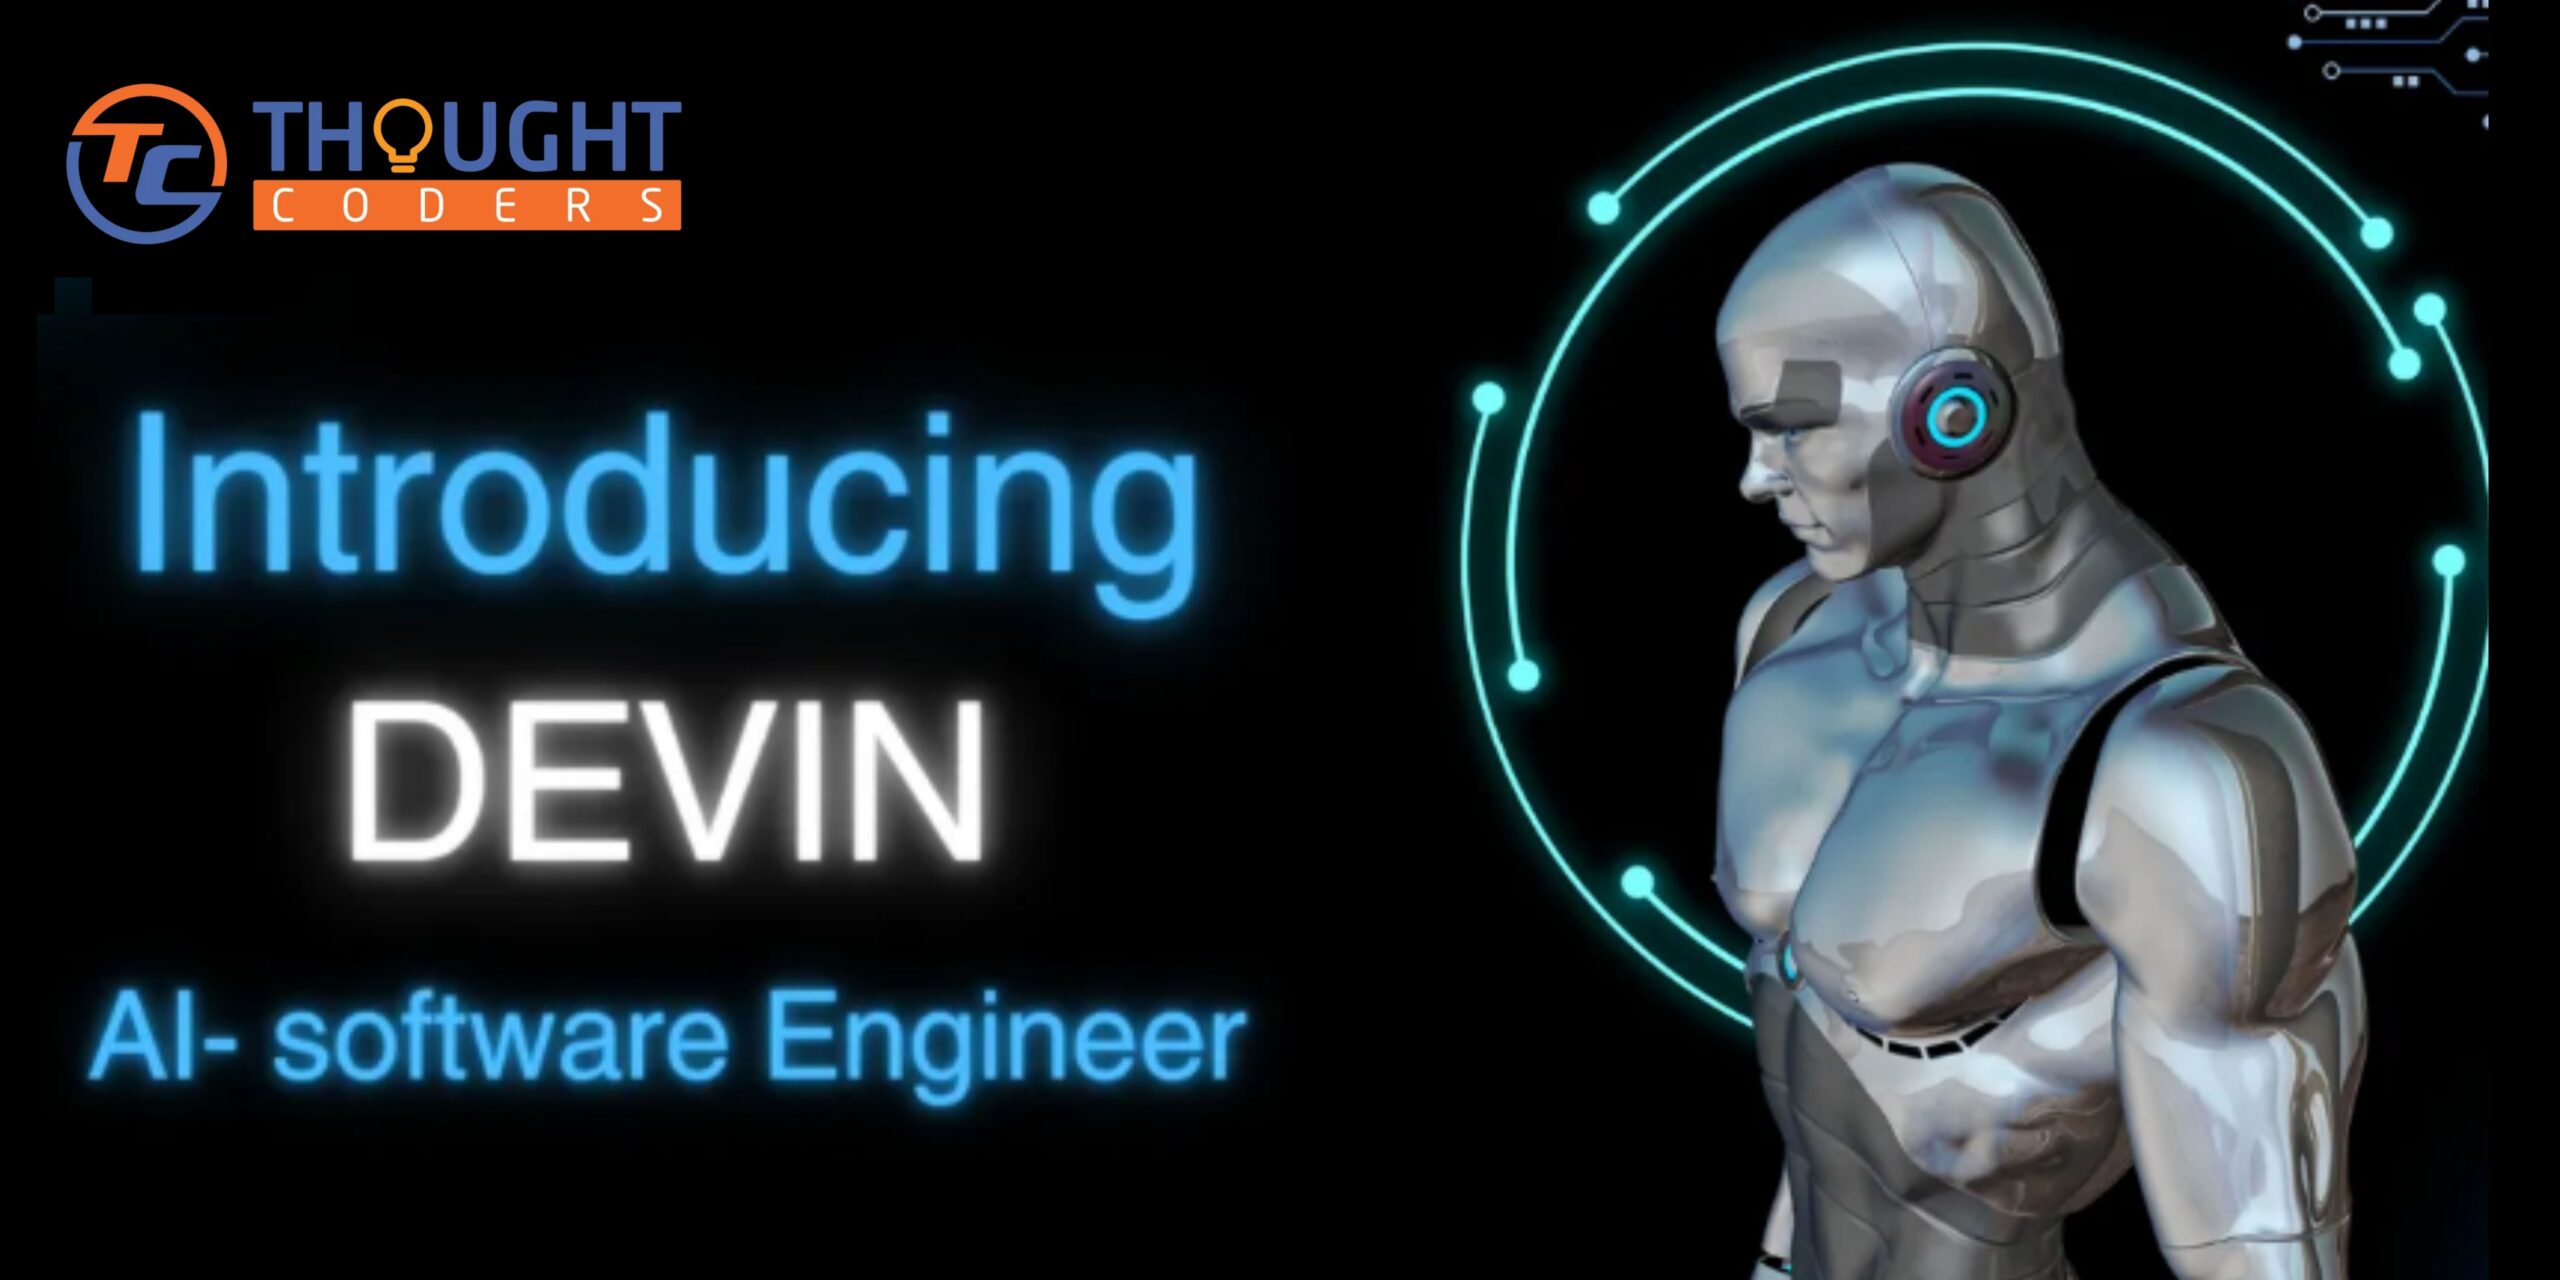 Introduction devin AI software Engineer